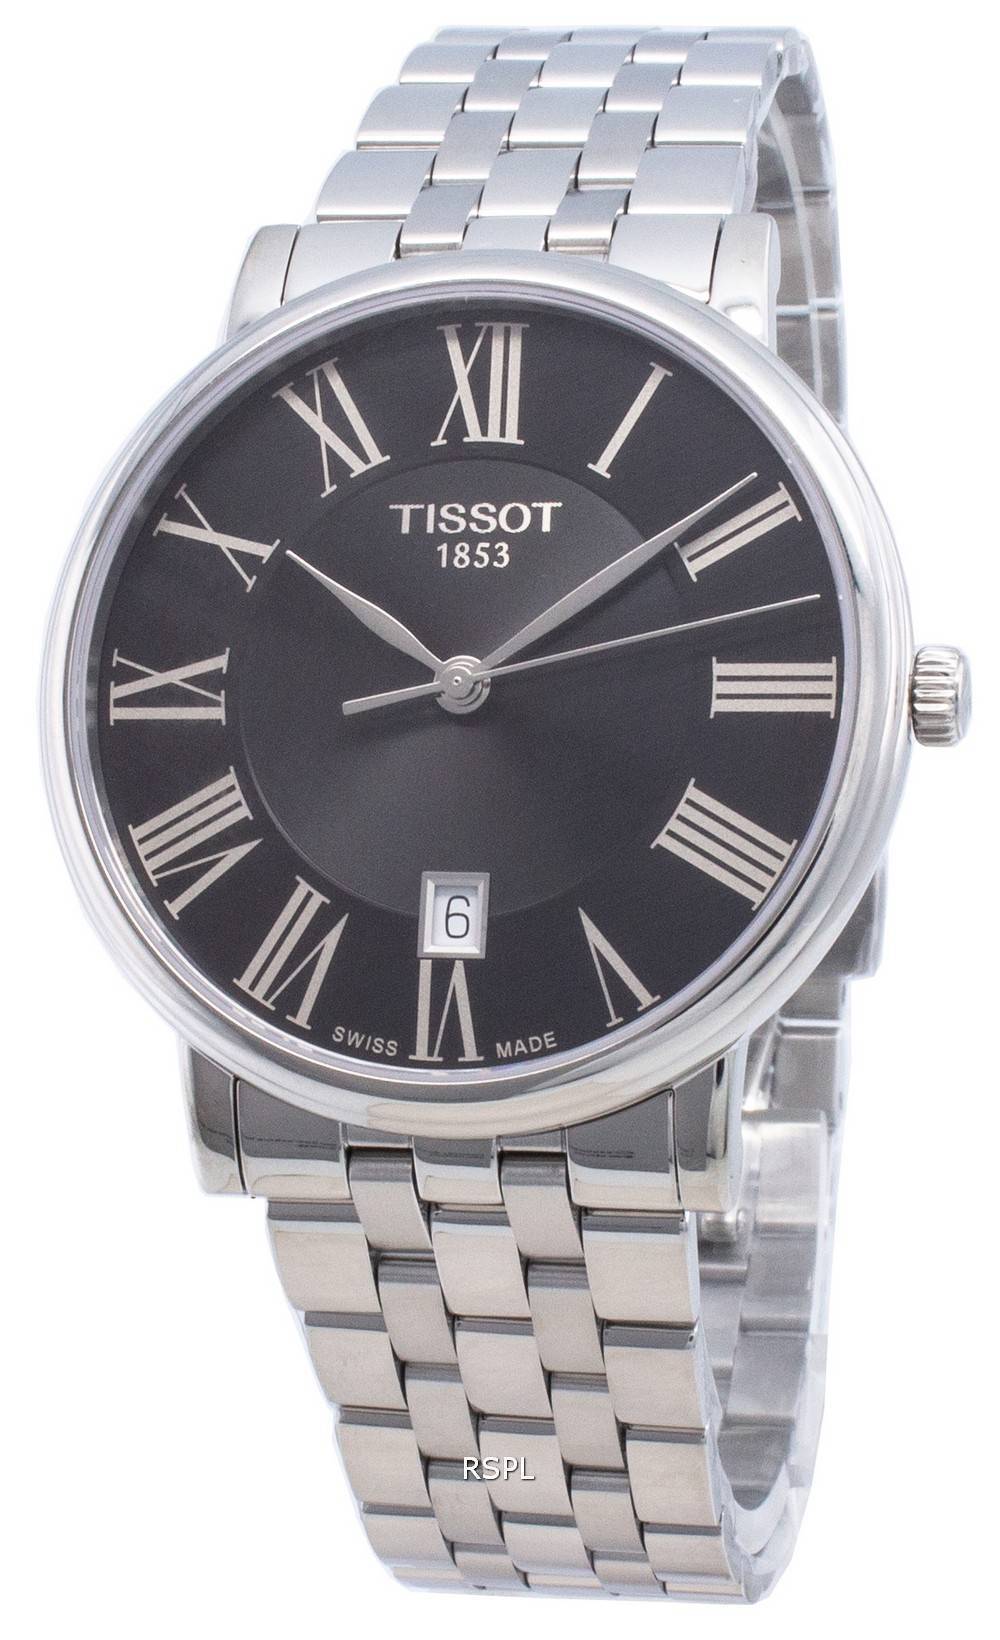 TISSOT CARSON PREMIUM QUARTZ (T122.410.11.053.00)
Case  40mm/316L stainless steel case
Crystal Scratch-resistant sapphire crystal
Movement Swiss quartz/ETA F06.115
Functions   EOL (battery end-of-life indicator)
Dial  Black with Roman indexes
Strap